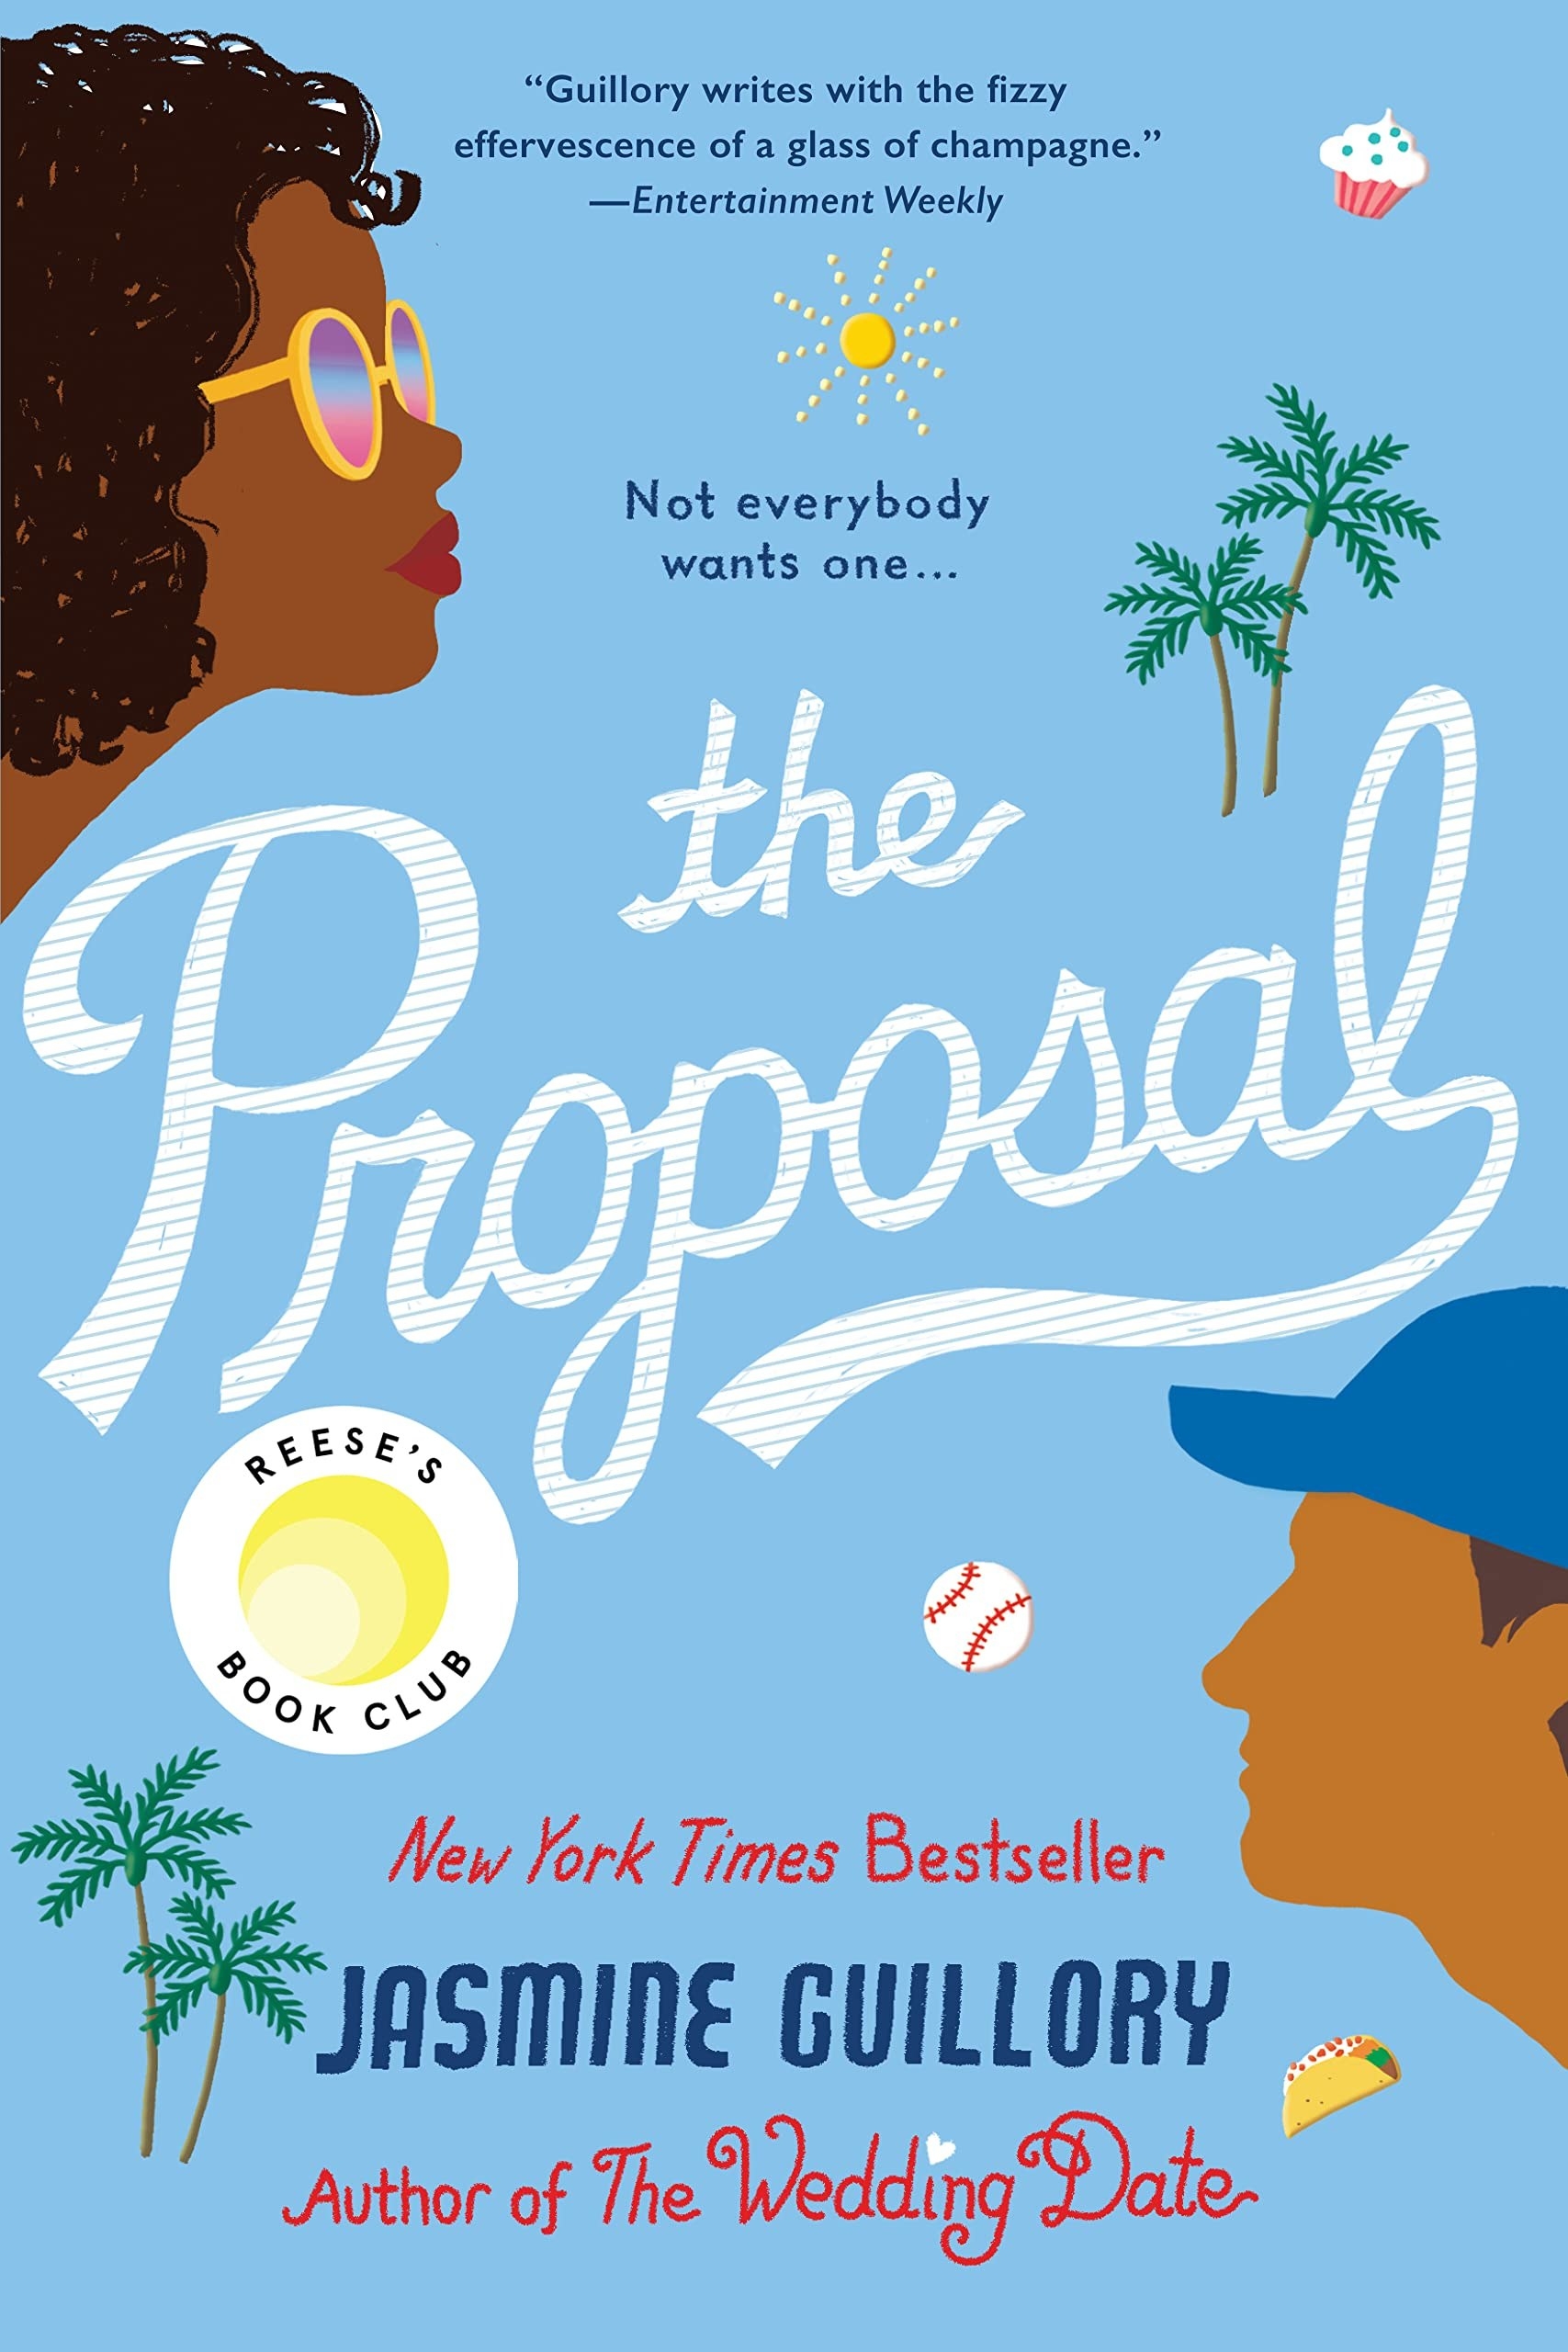 A blue book cover with a couple, baseballs, palm trees, and tacos that reads The Proposal